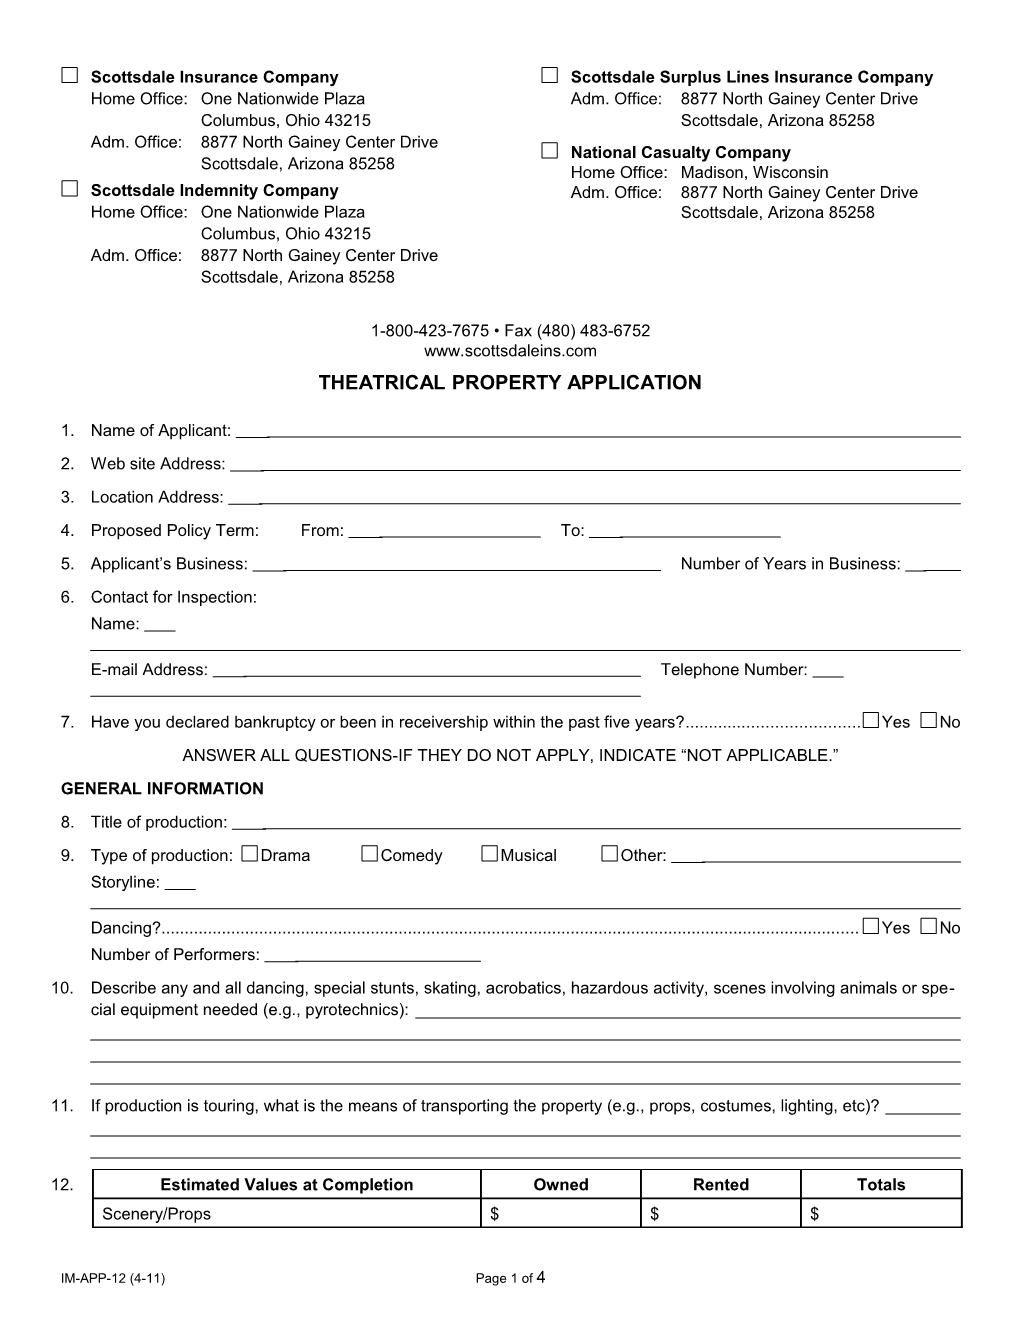 Theatrical Property Application